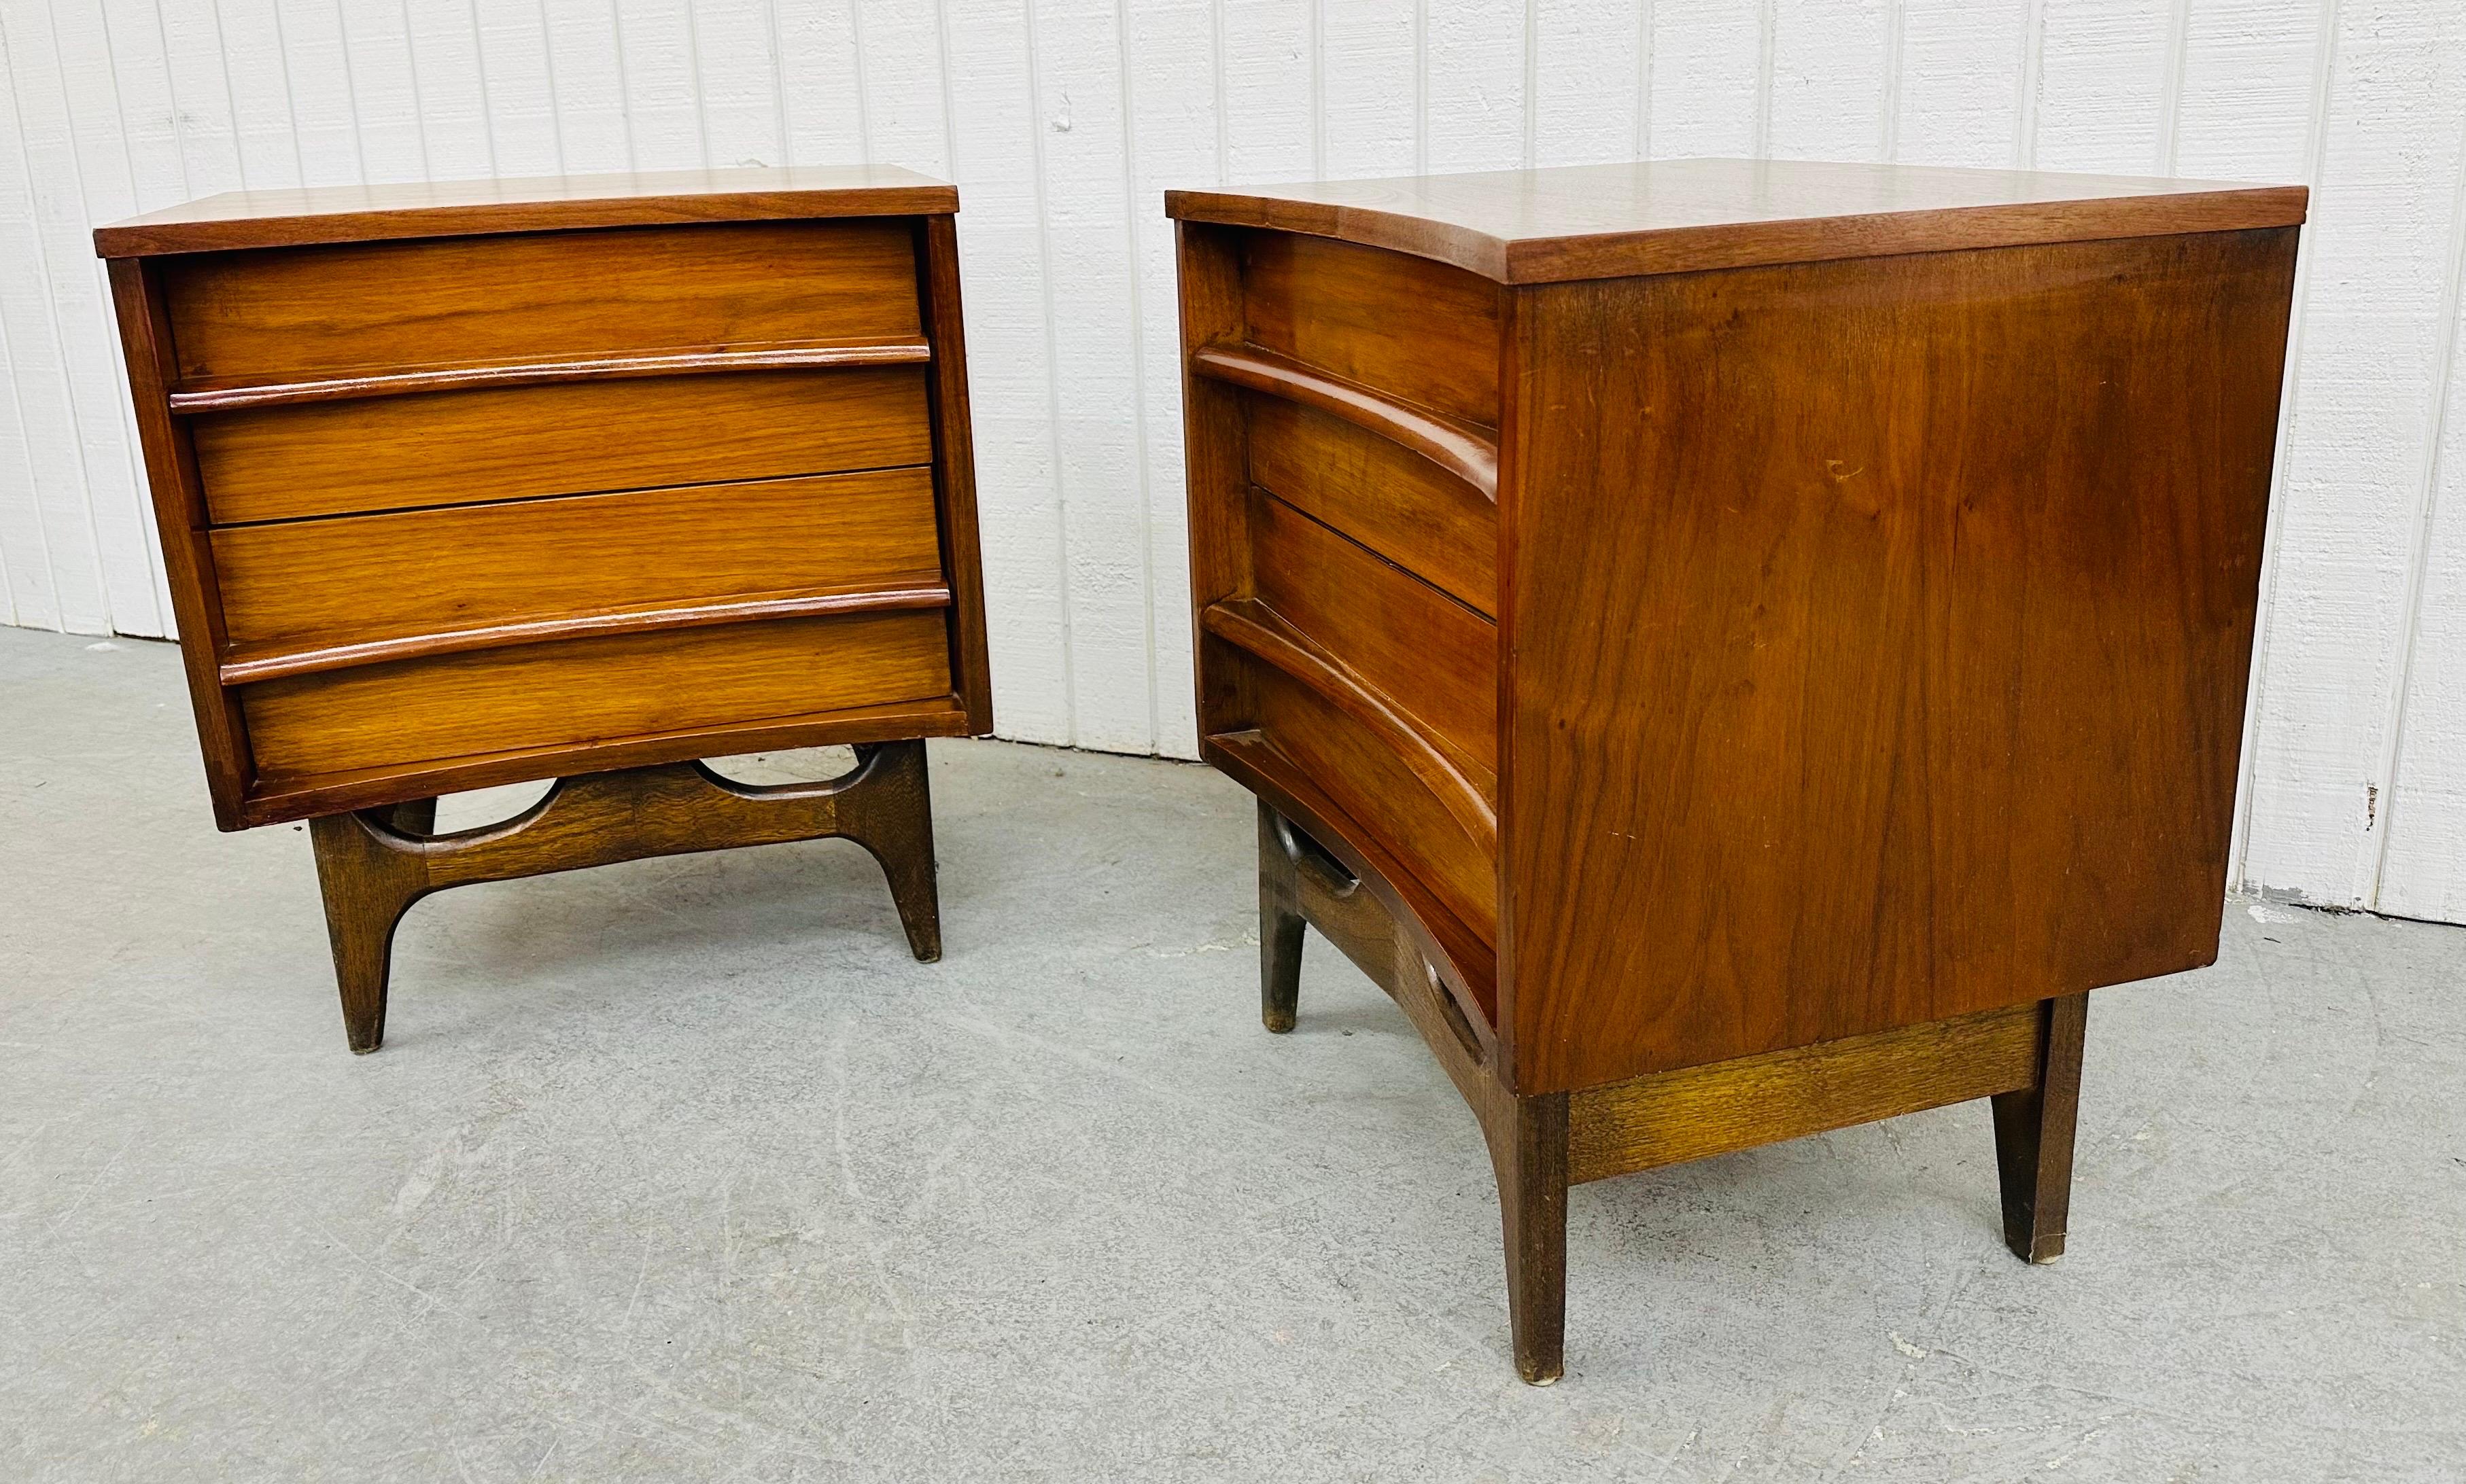 This listing is for a pair of Mid-Century Modern Young Manufacturing Walnut Nightstands. Featuring a curved front design, modern legs with sculpted stretcher, two drawers with wooden pulls, and a beautiful walnut finish. This is an exceptional